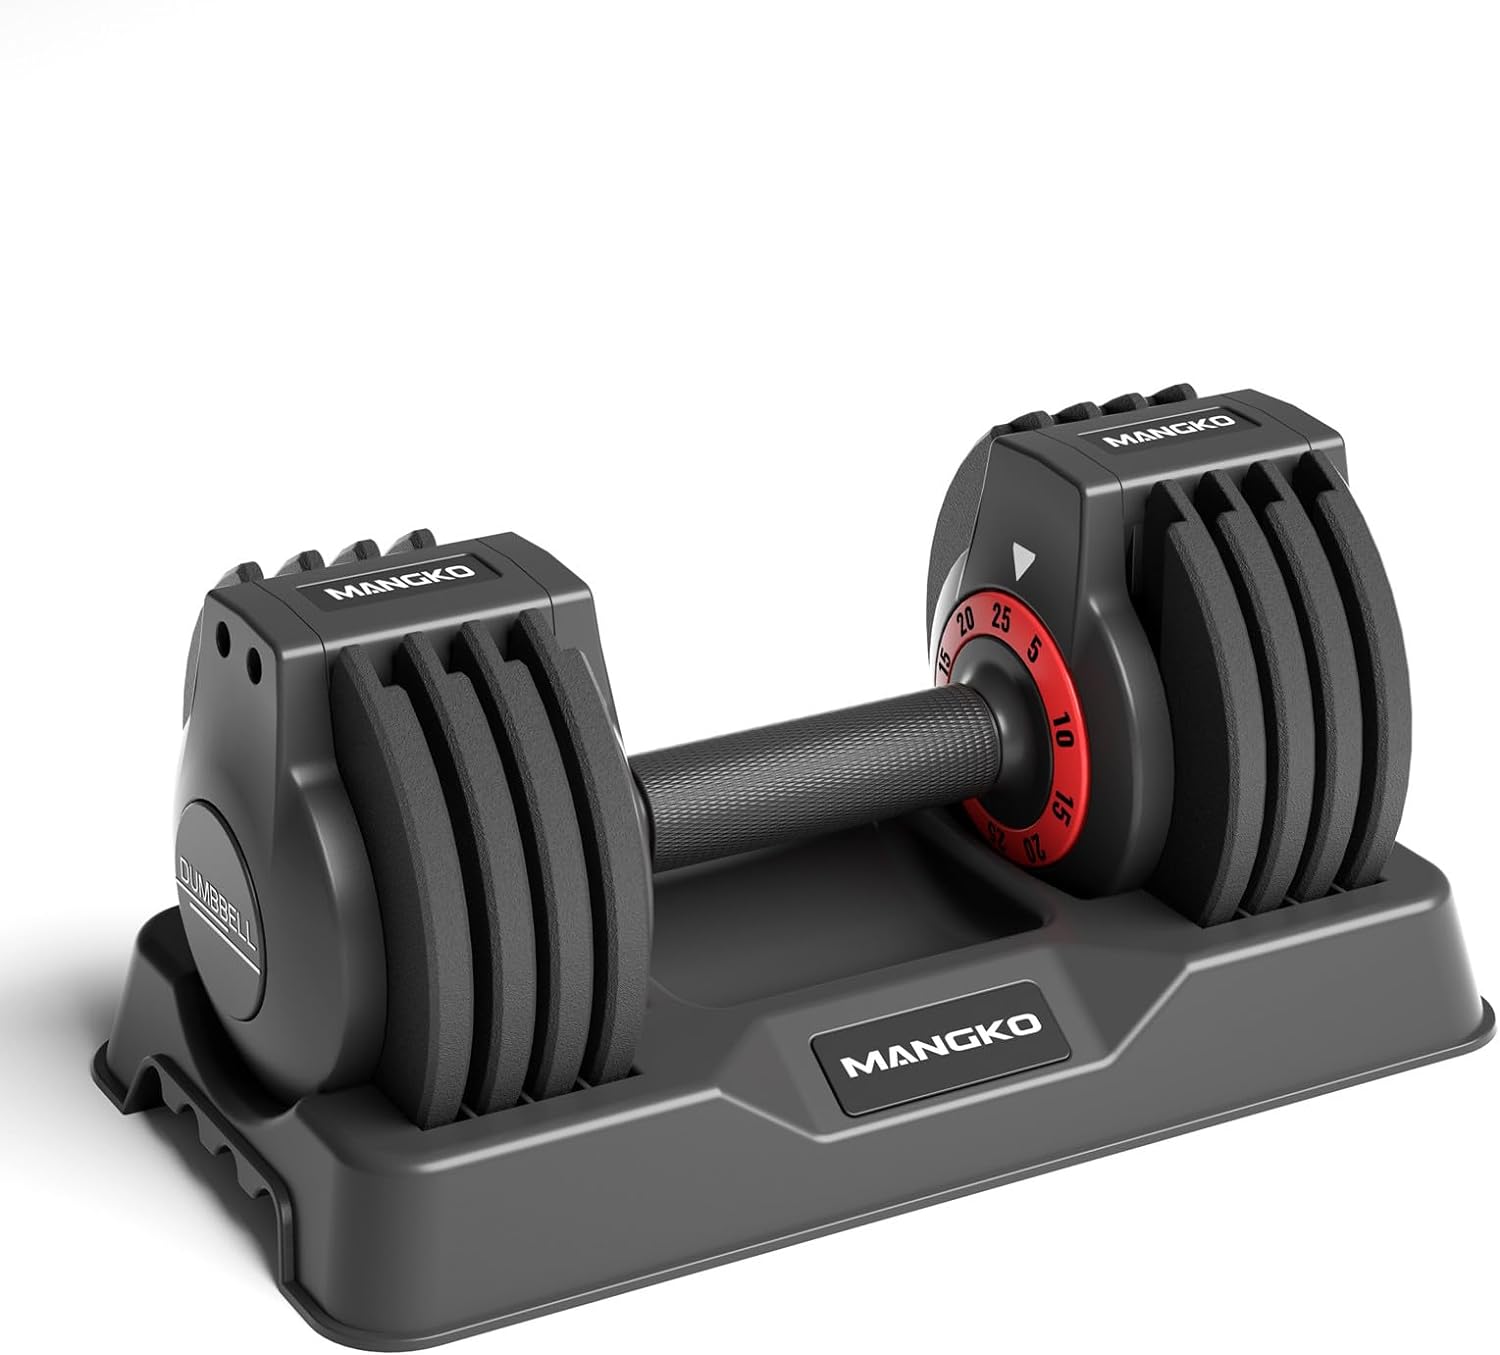 Adjustable Dumbbell 25LB Single Dumbbell Weight, 5 in 1 Free Weight Dumbbell with Anti-Slip Nylon Handle, Ideal for Full-Body Home Gym Workouts